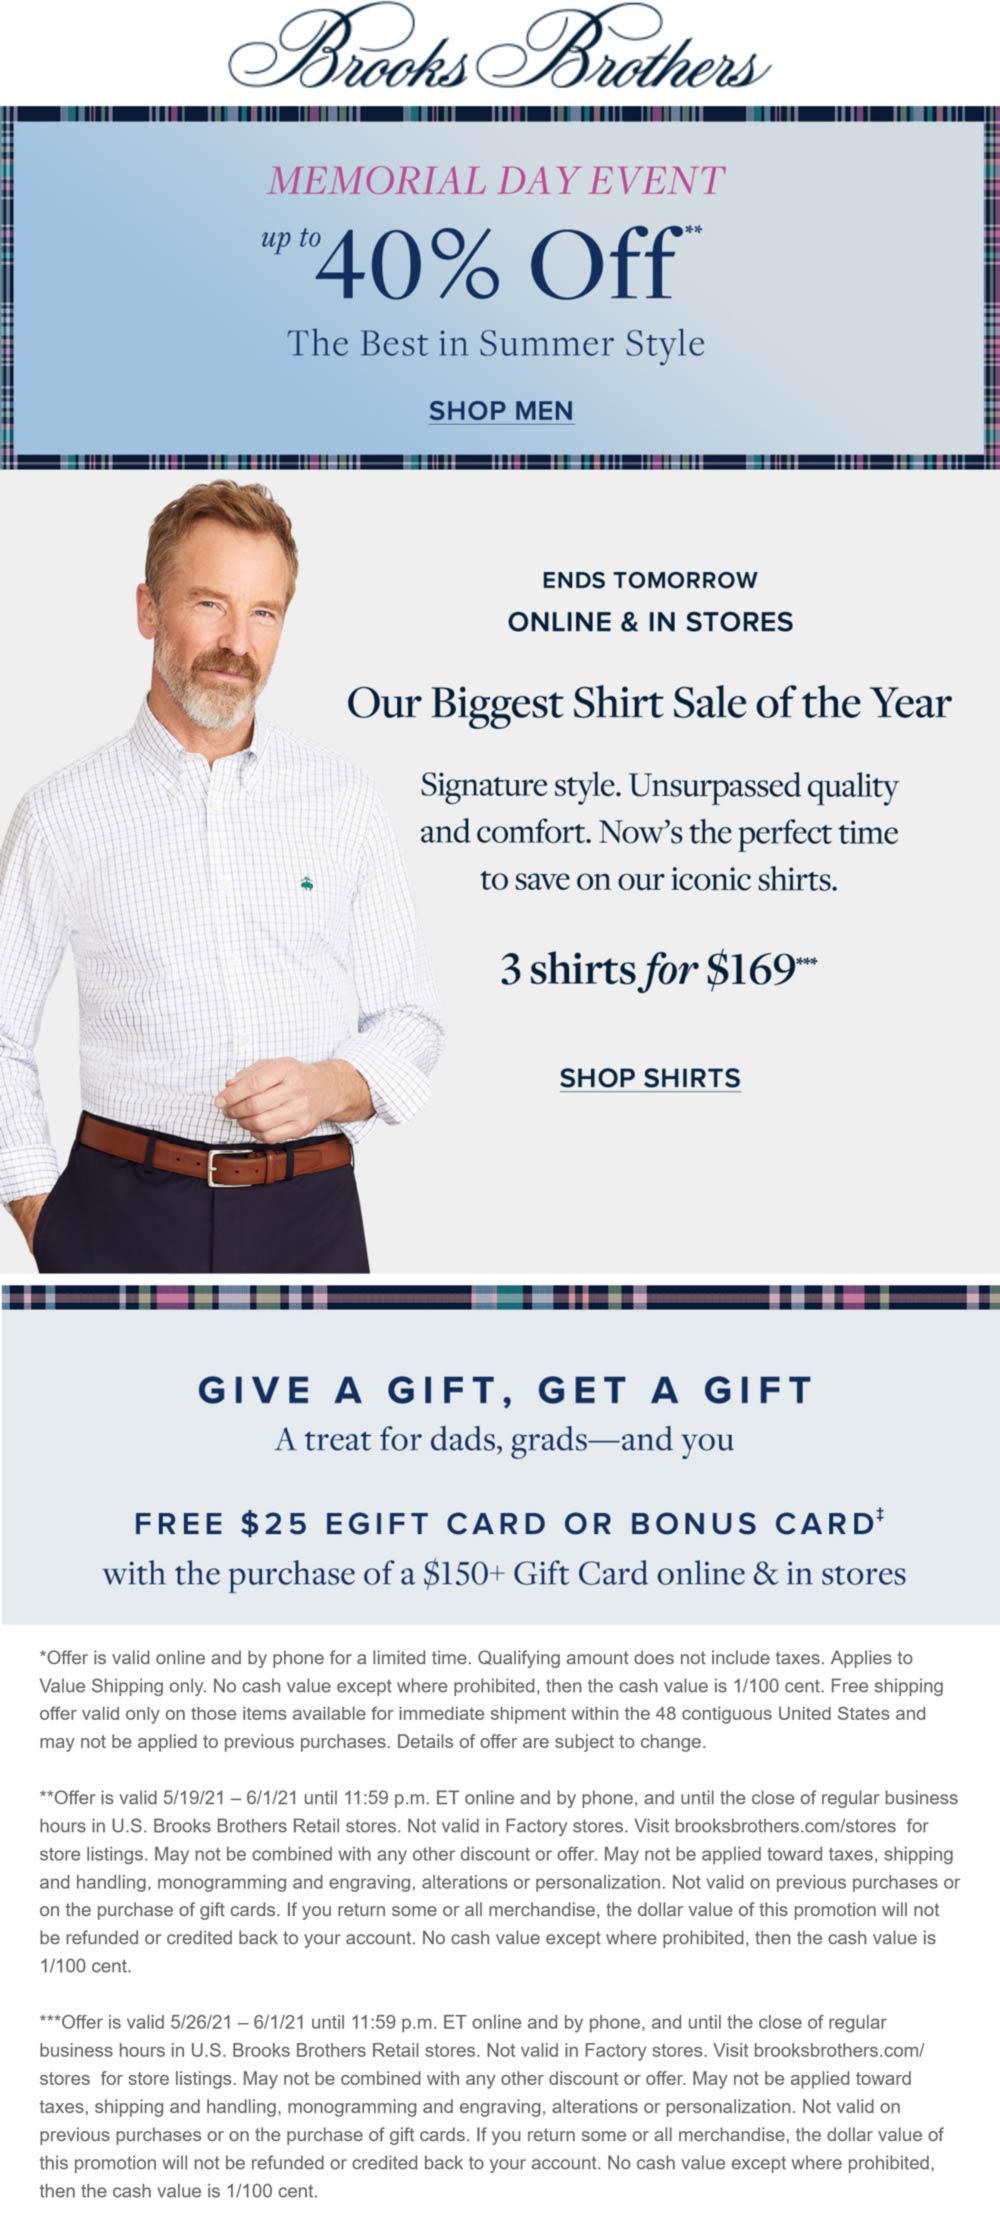 Brooks Brothers stores Coupon  40% off at Brooks Brothers, ditto online #brooksbrothers 